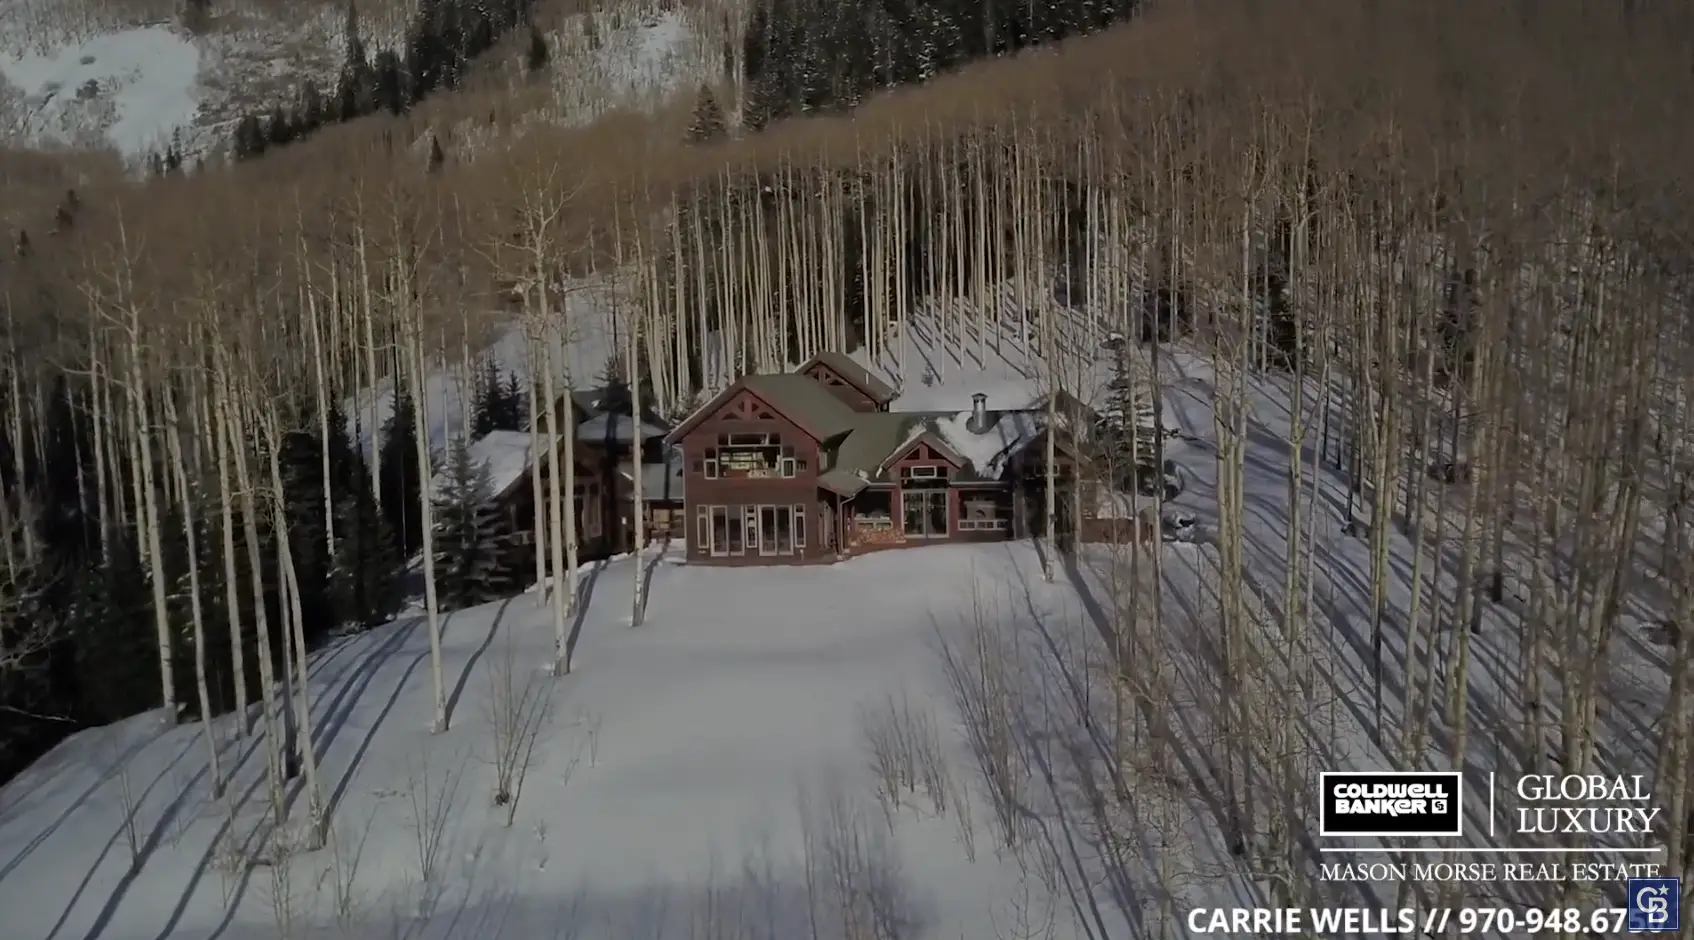 Melanie Griffith's Aspen mansion | Source: youtube.com/@coldwellbanker